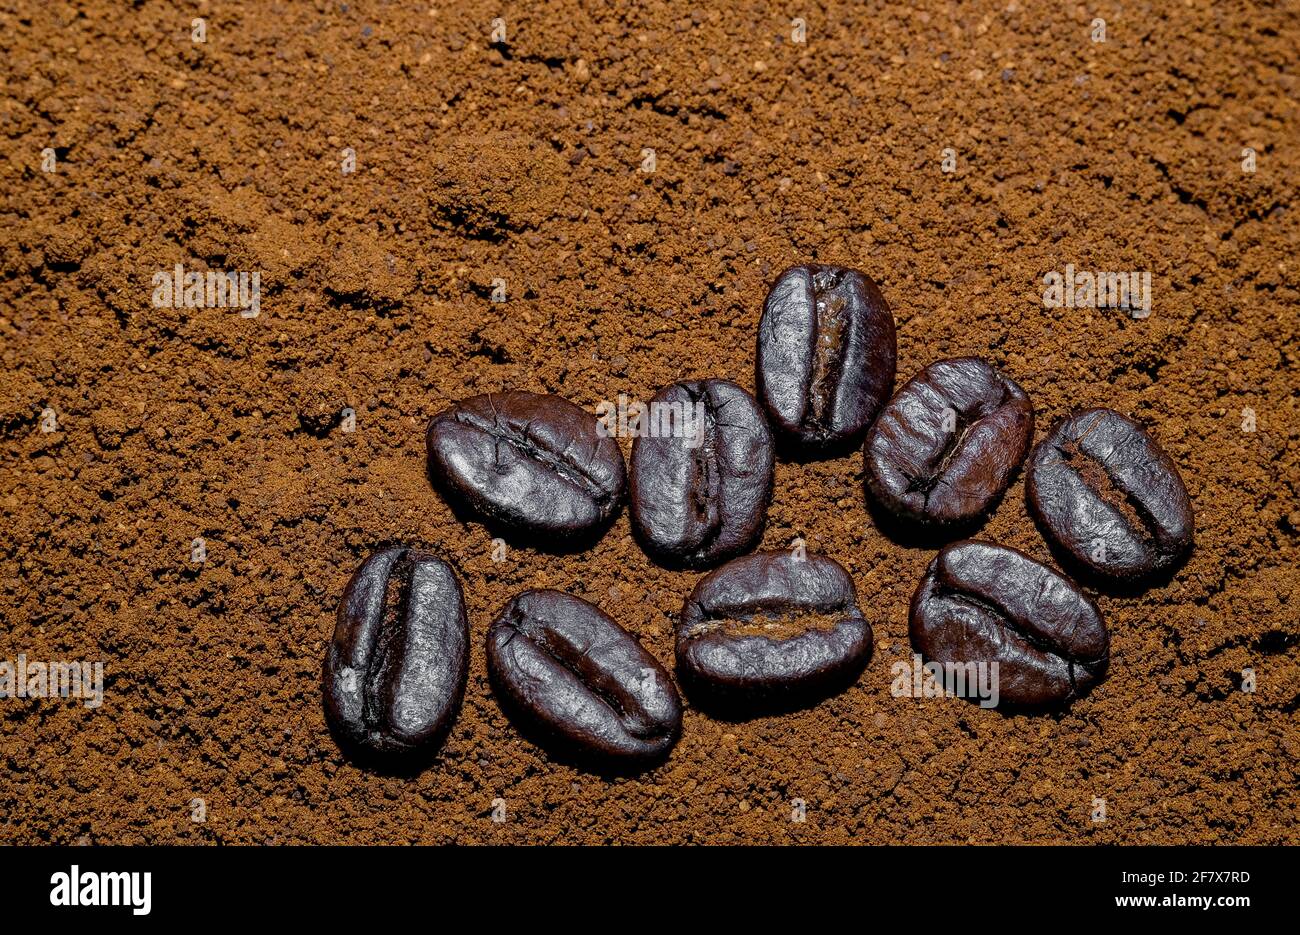 ground black coffee background with a few whole black coffee beans Stock Photo